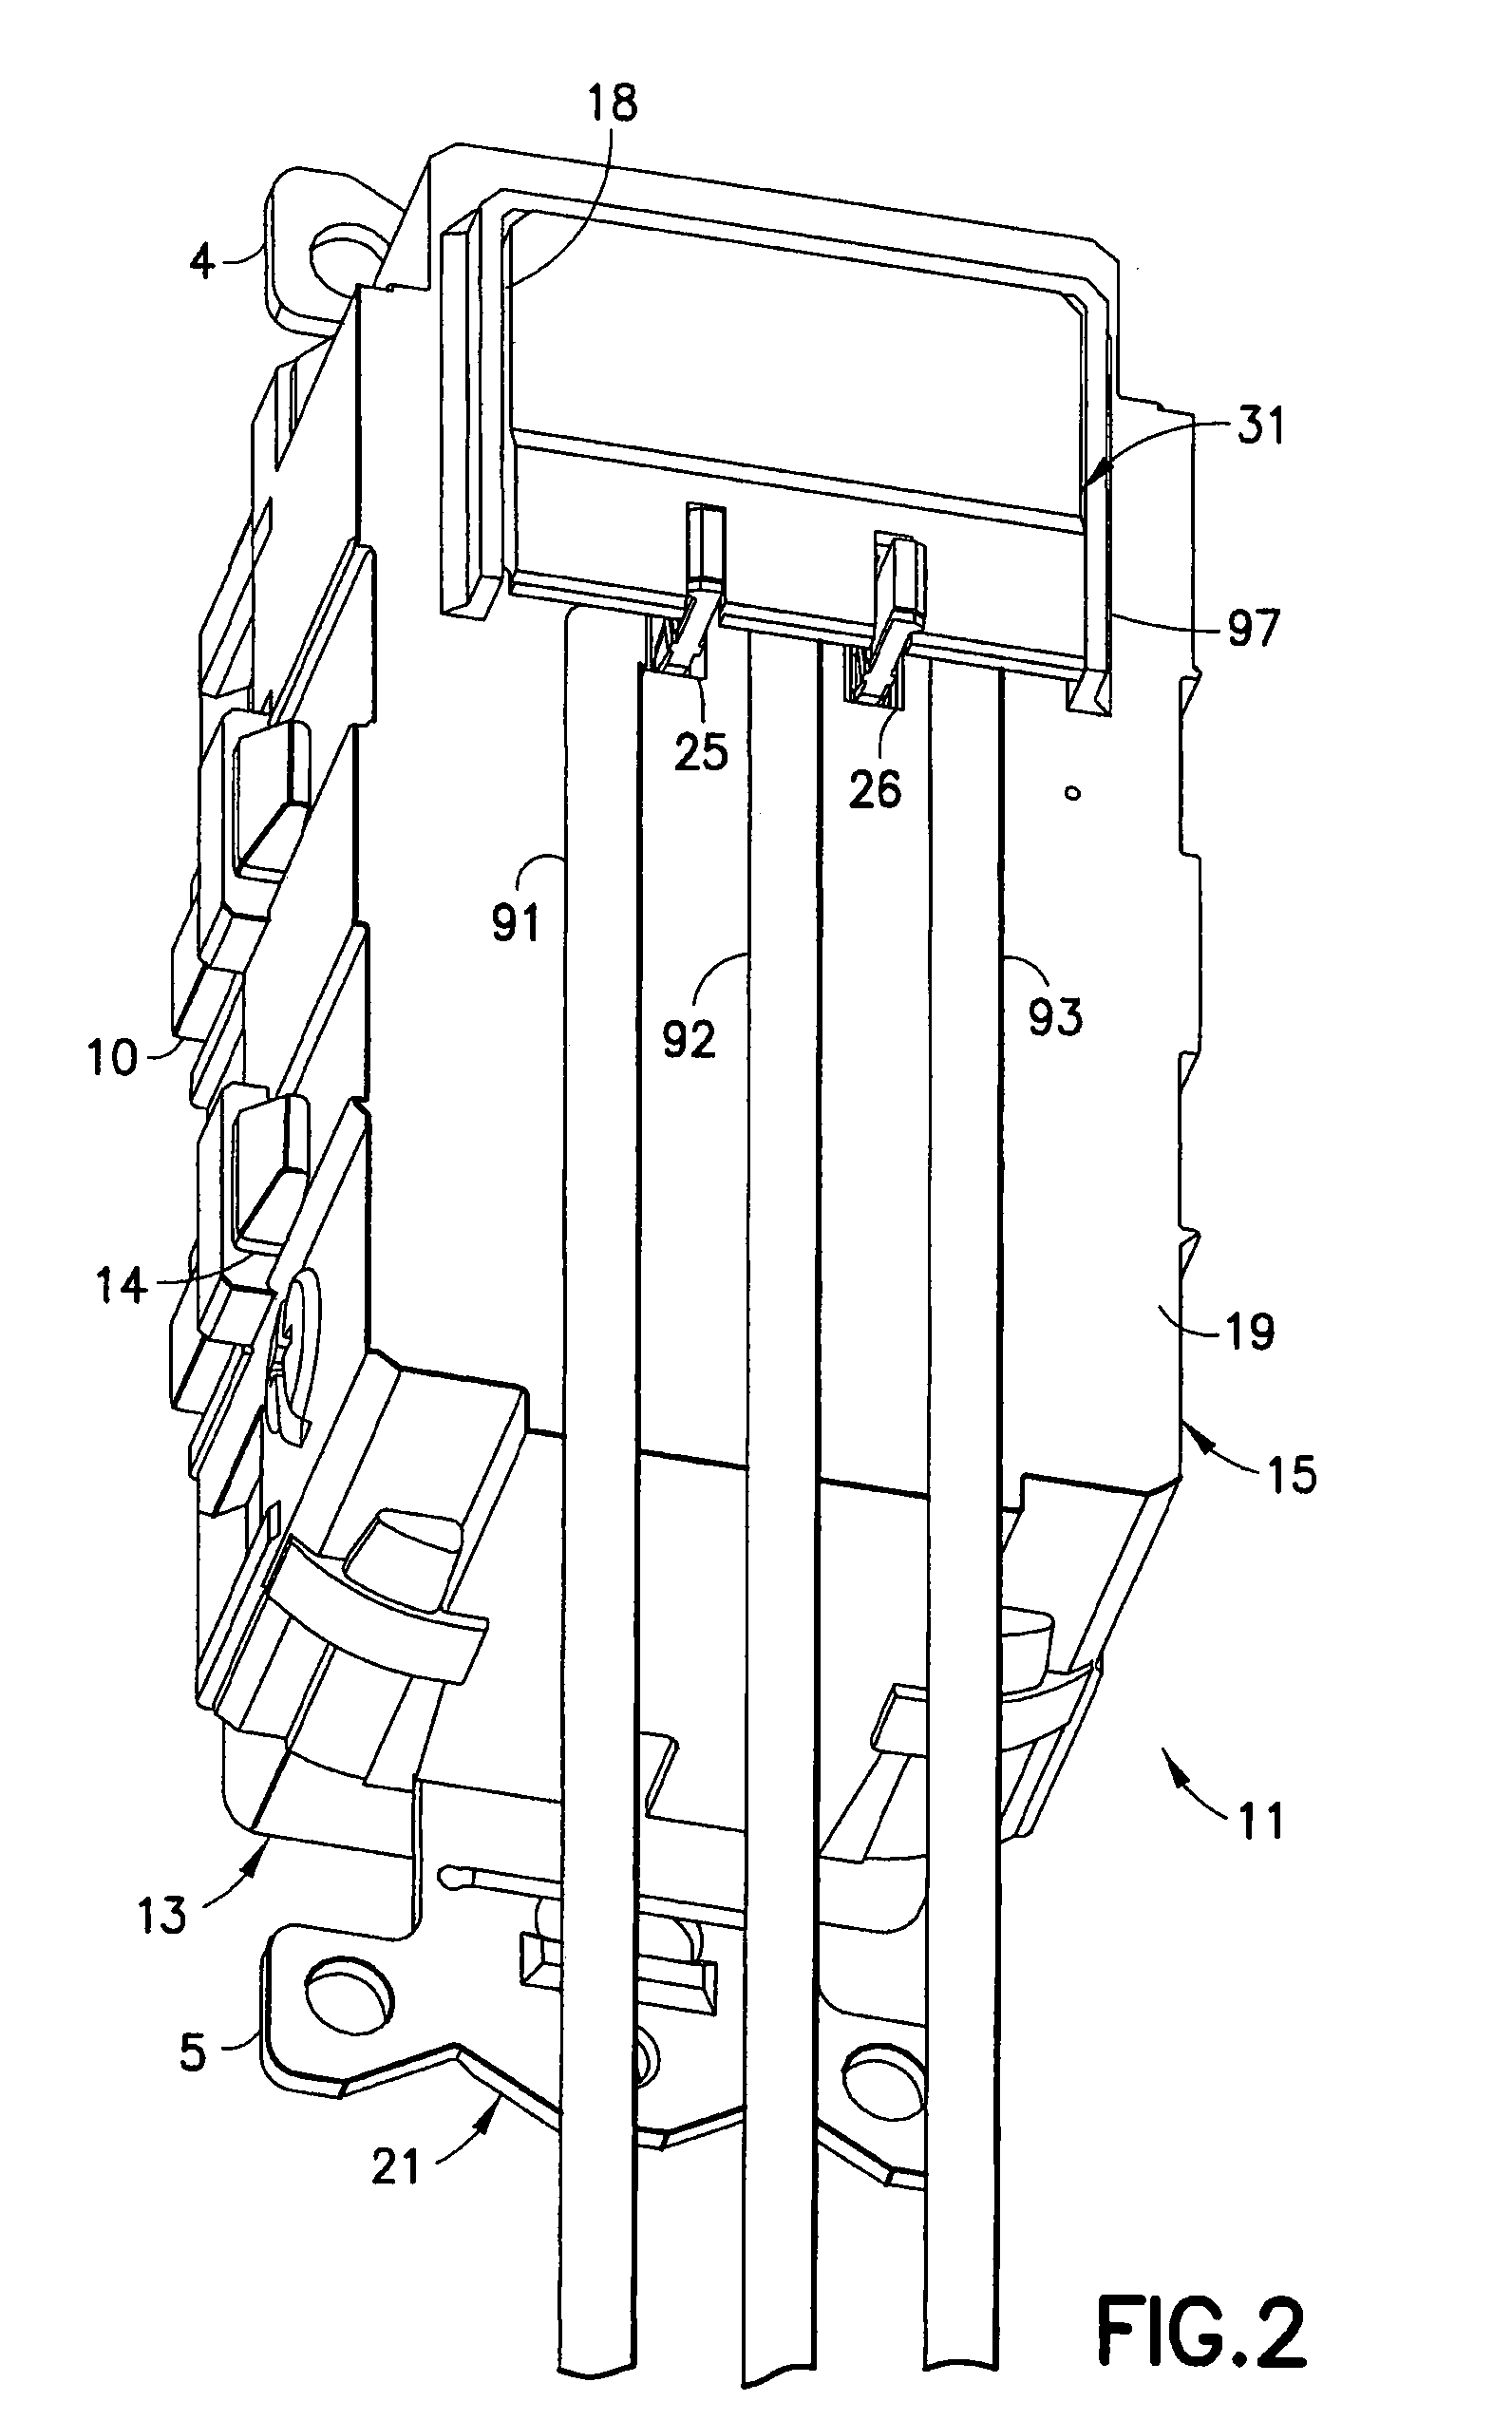 Low profile electrical device assembly